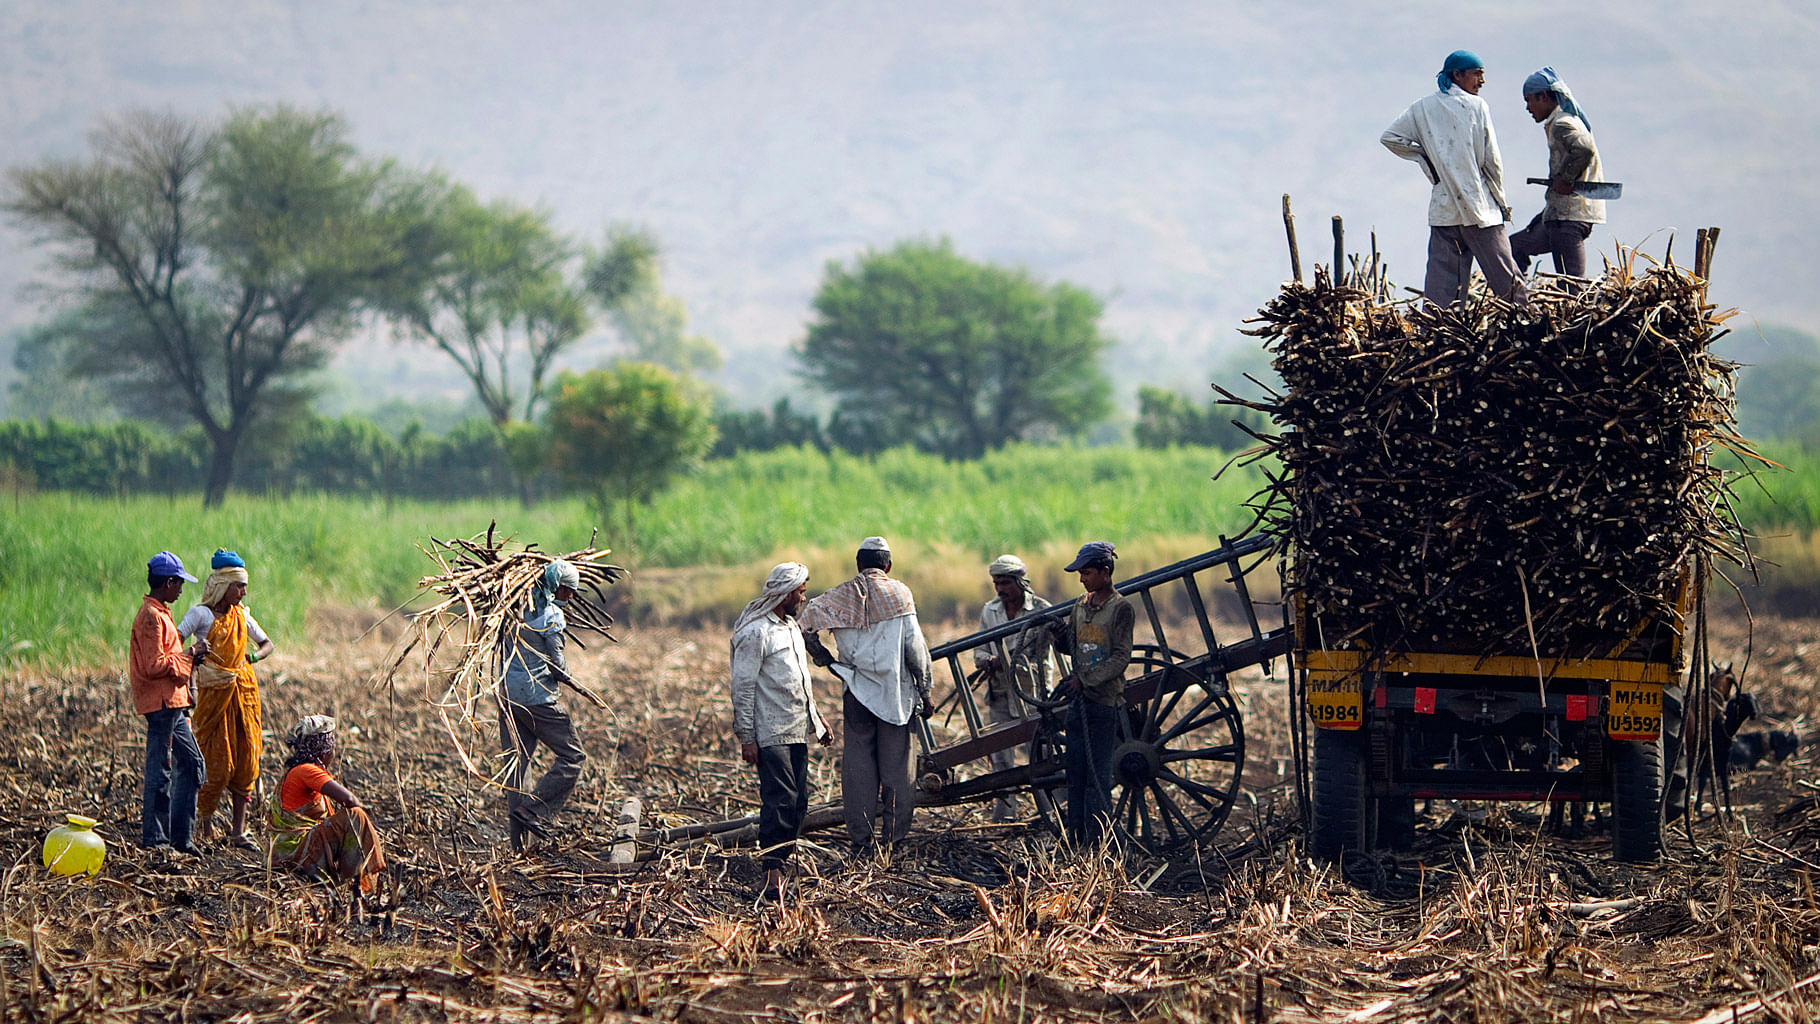 Farmers and labourers load harvested sugarcane onto a trailer.&nbsp;